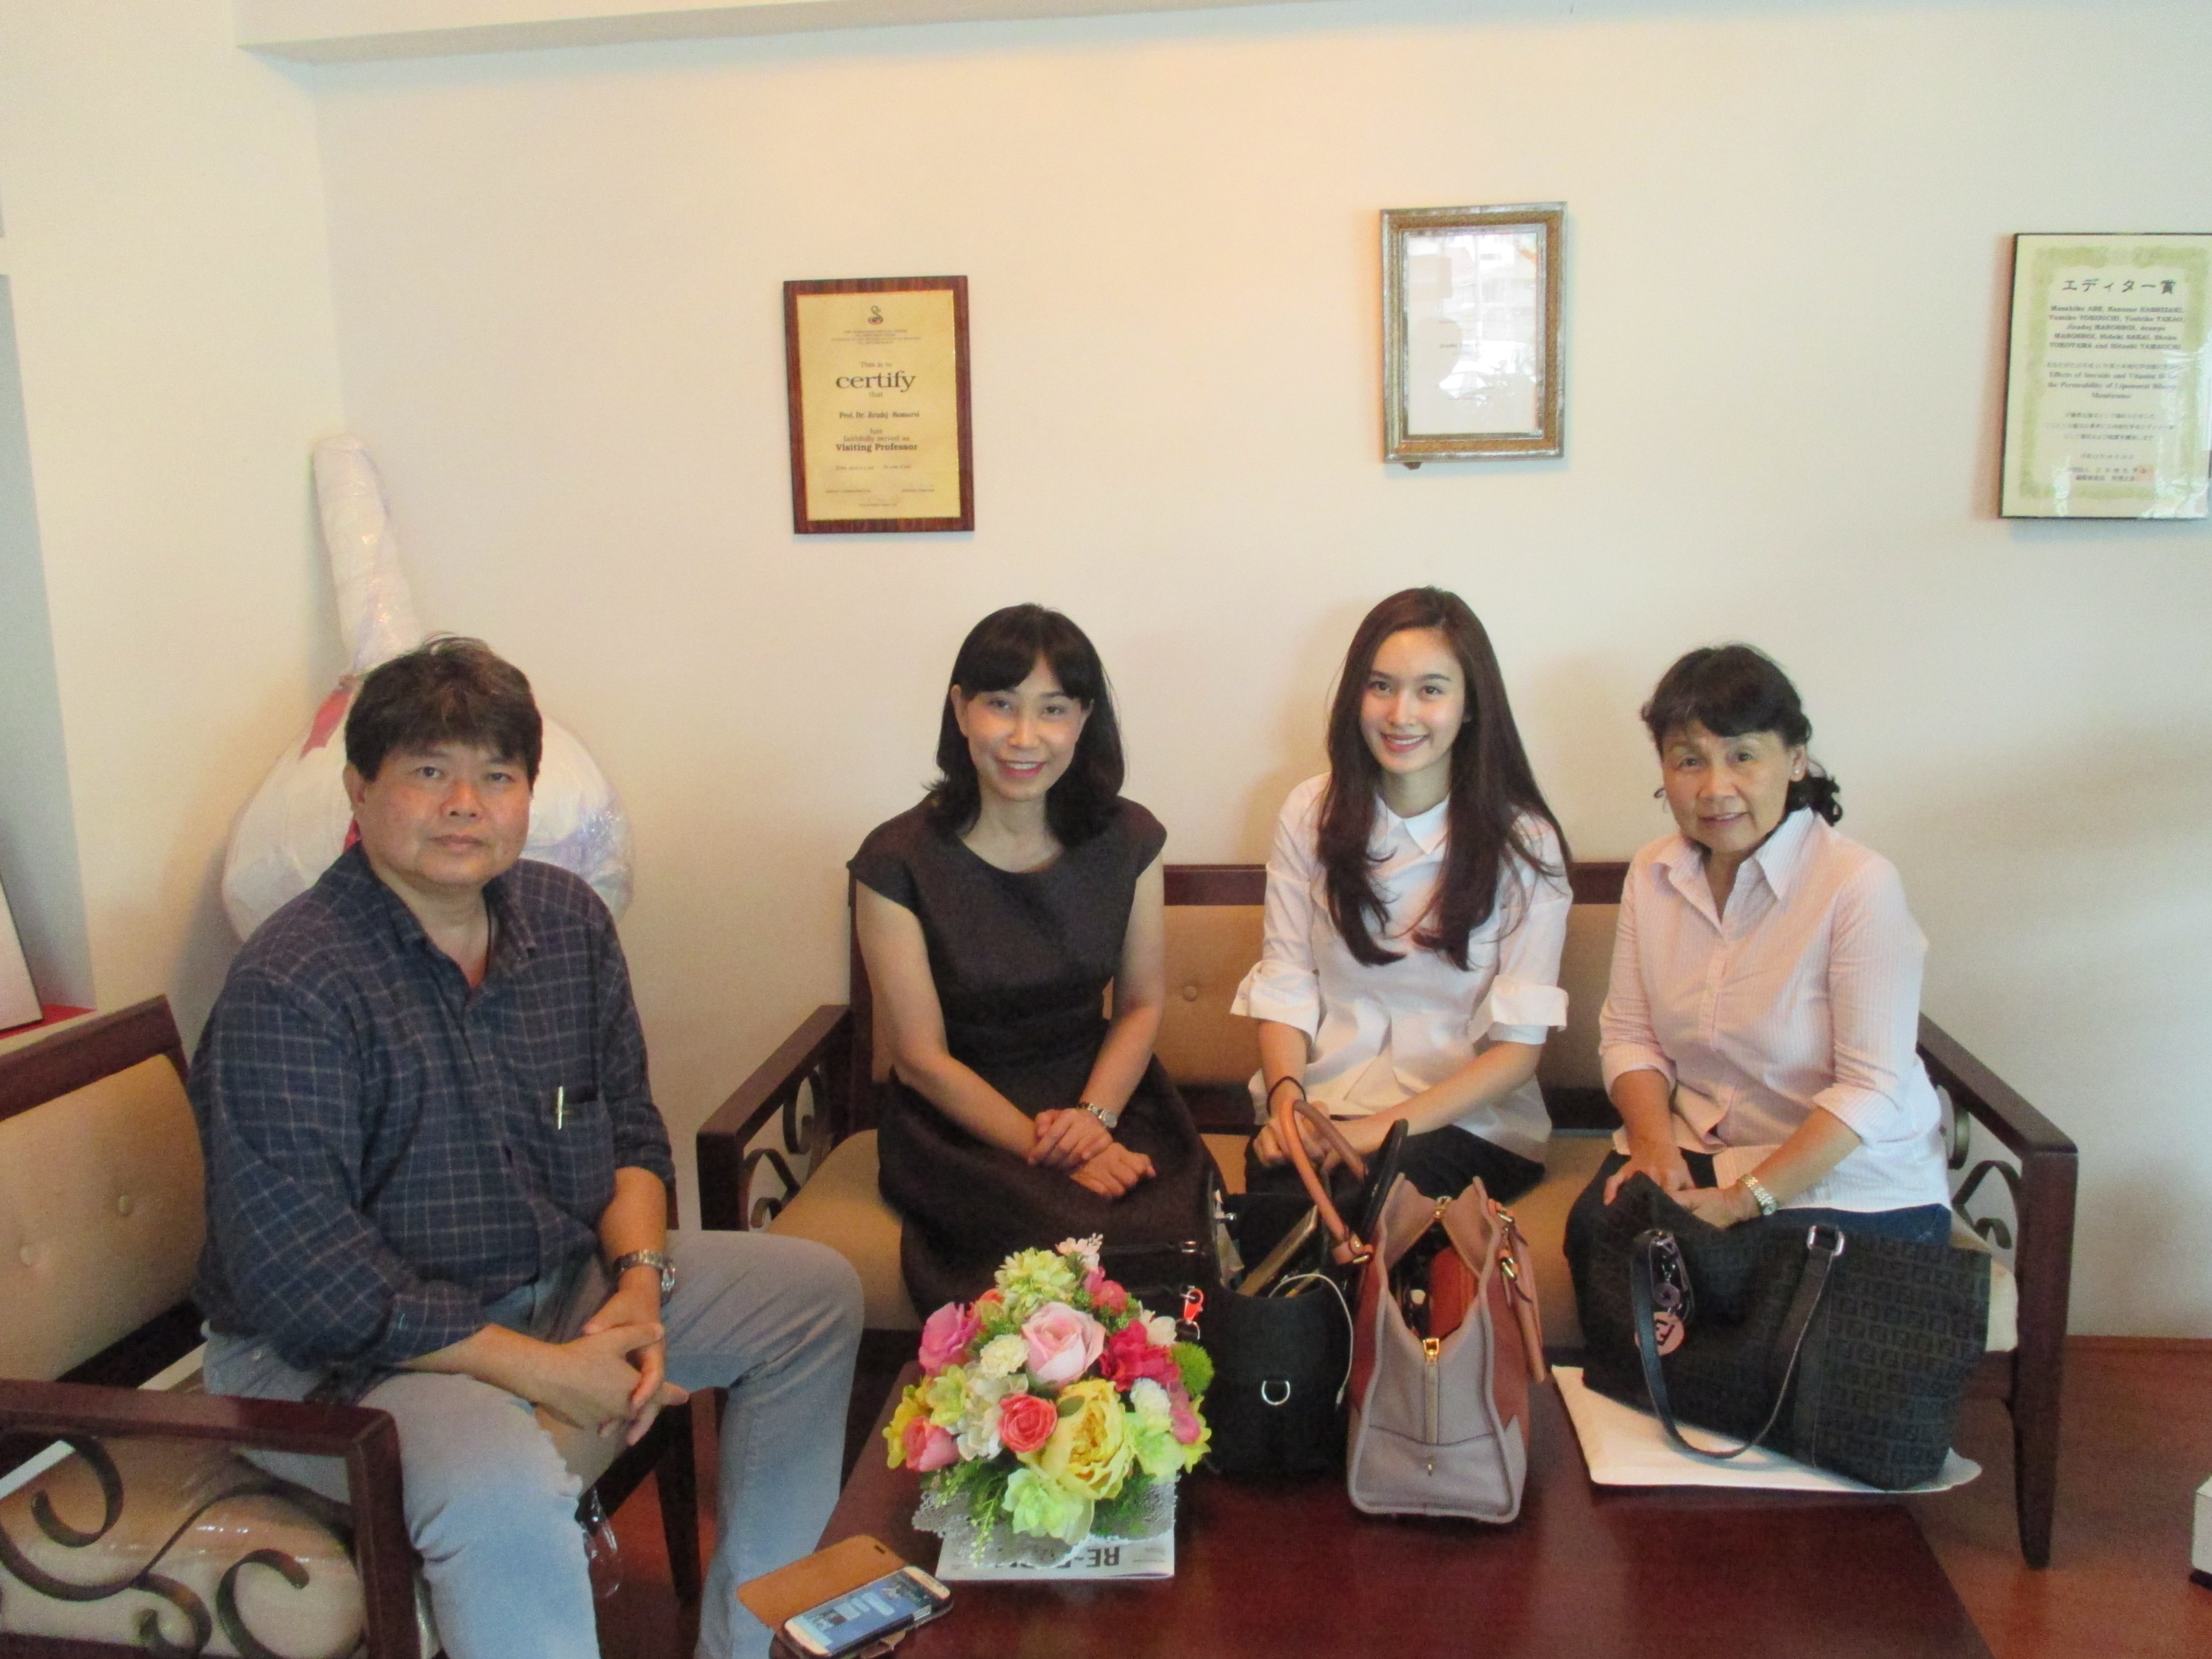 Ms. Poy Treechada from Fure Fu Co., Ltd. in Bangkok together with  Mrs. Siripen Pansritum, Managing Director from Kamol Cosmetic Hospital in Bangkok visited Manose Health and Beauty Research Center